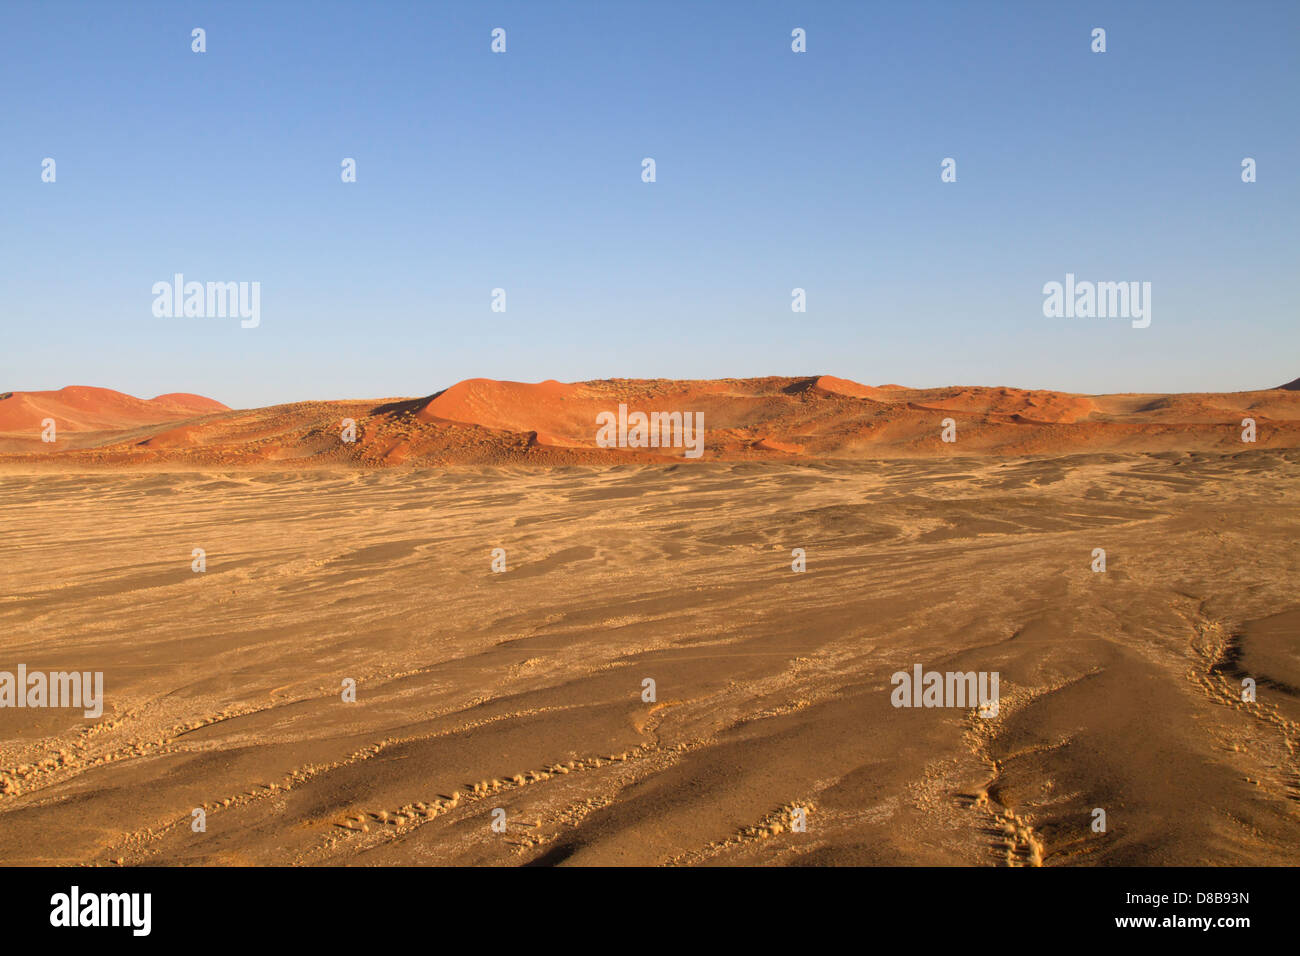 View from a hot air balloon over the dunes, Sossusvlei Namibia Stock Photo